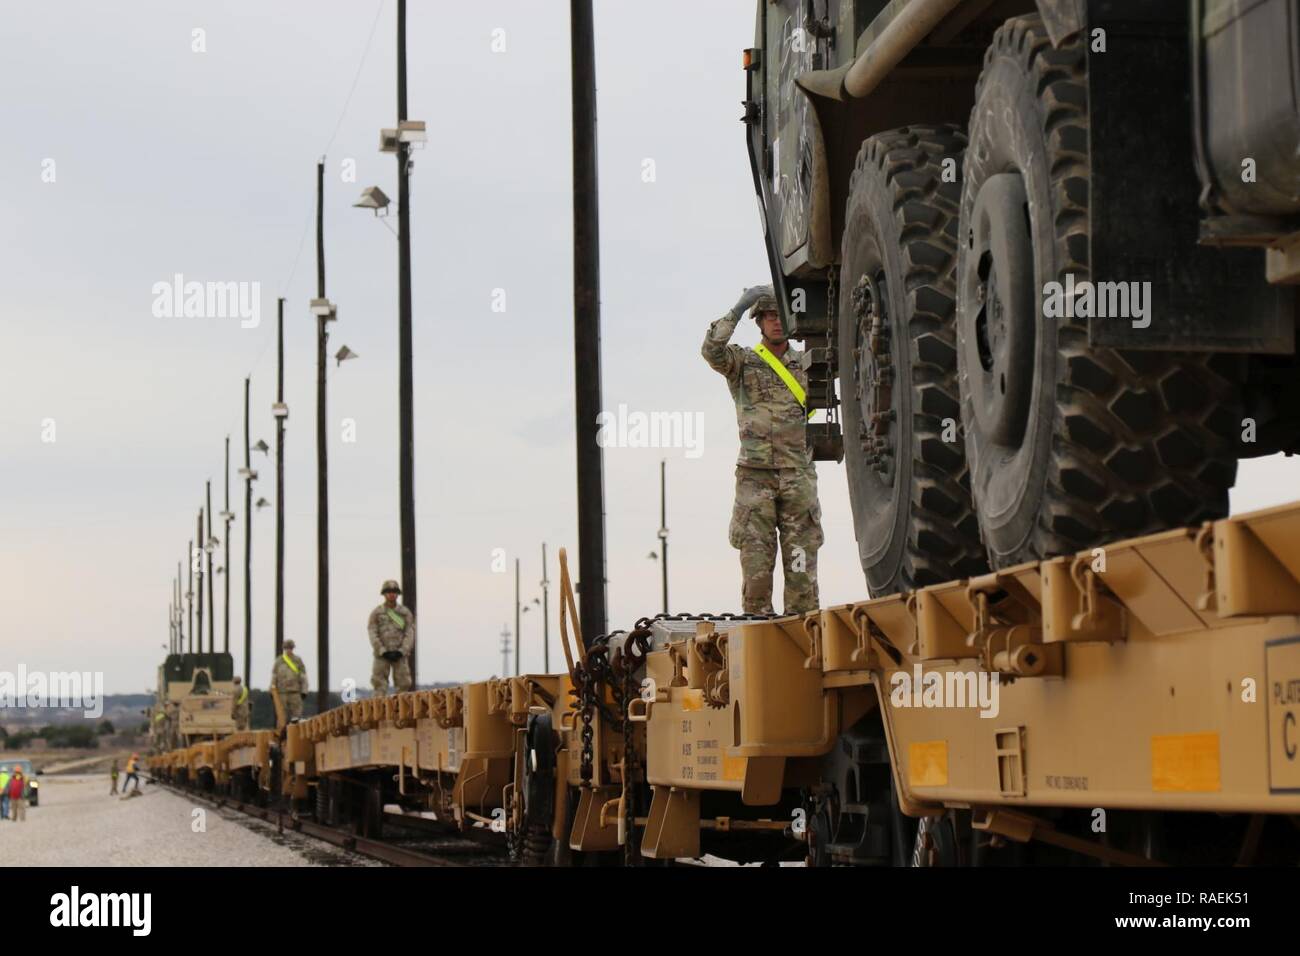 Sgt. Brice Lawrence, 303rd Military Intelligence Battalion, 504th Military Intelligence Brigade, guides a vehicle through the rail, Dec. 12, 2018, Fort Hood, Texas. Soldiers worked with other units to load all vehicles for movement. Stock Photo